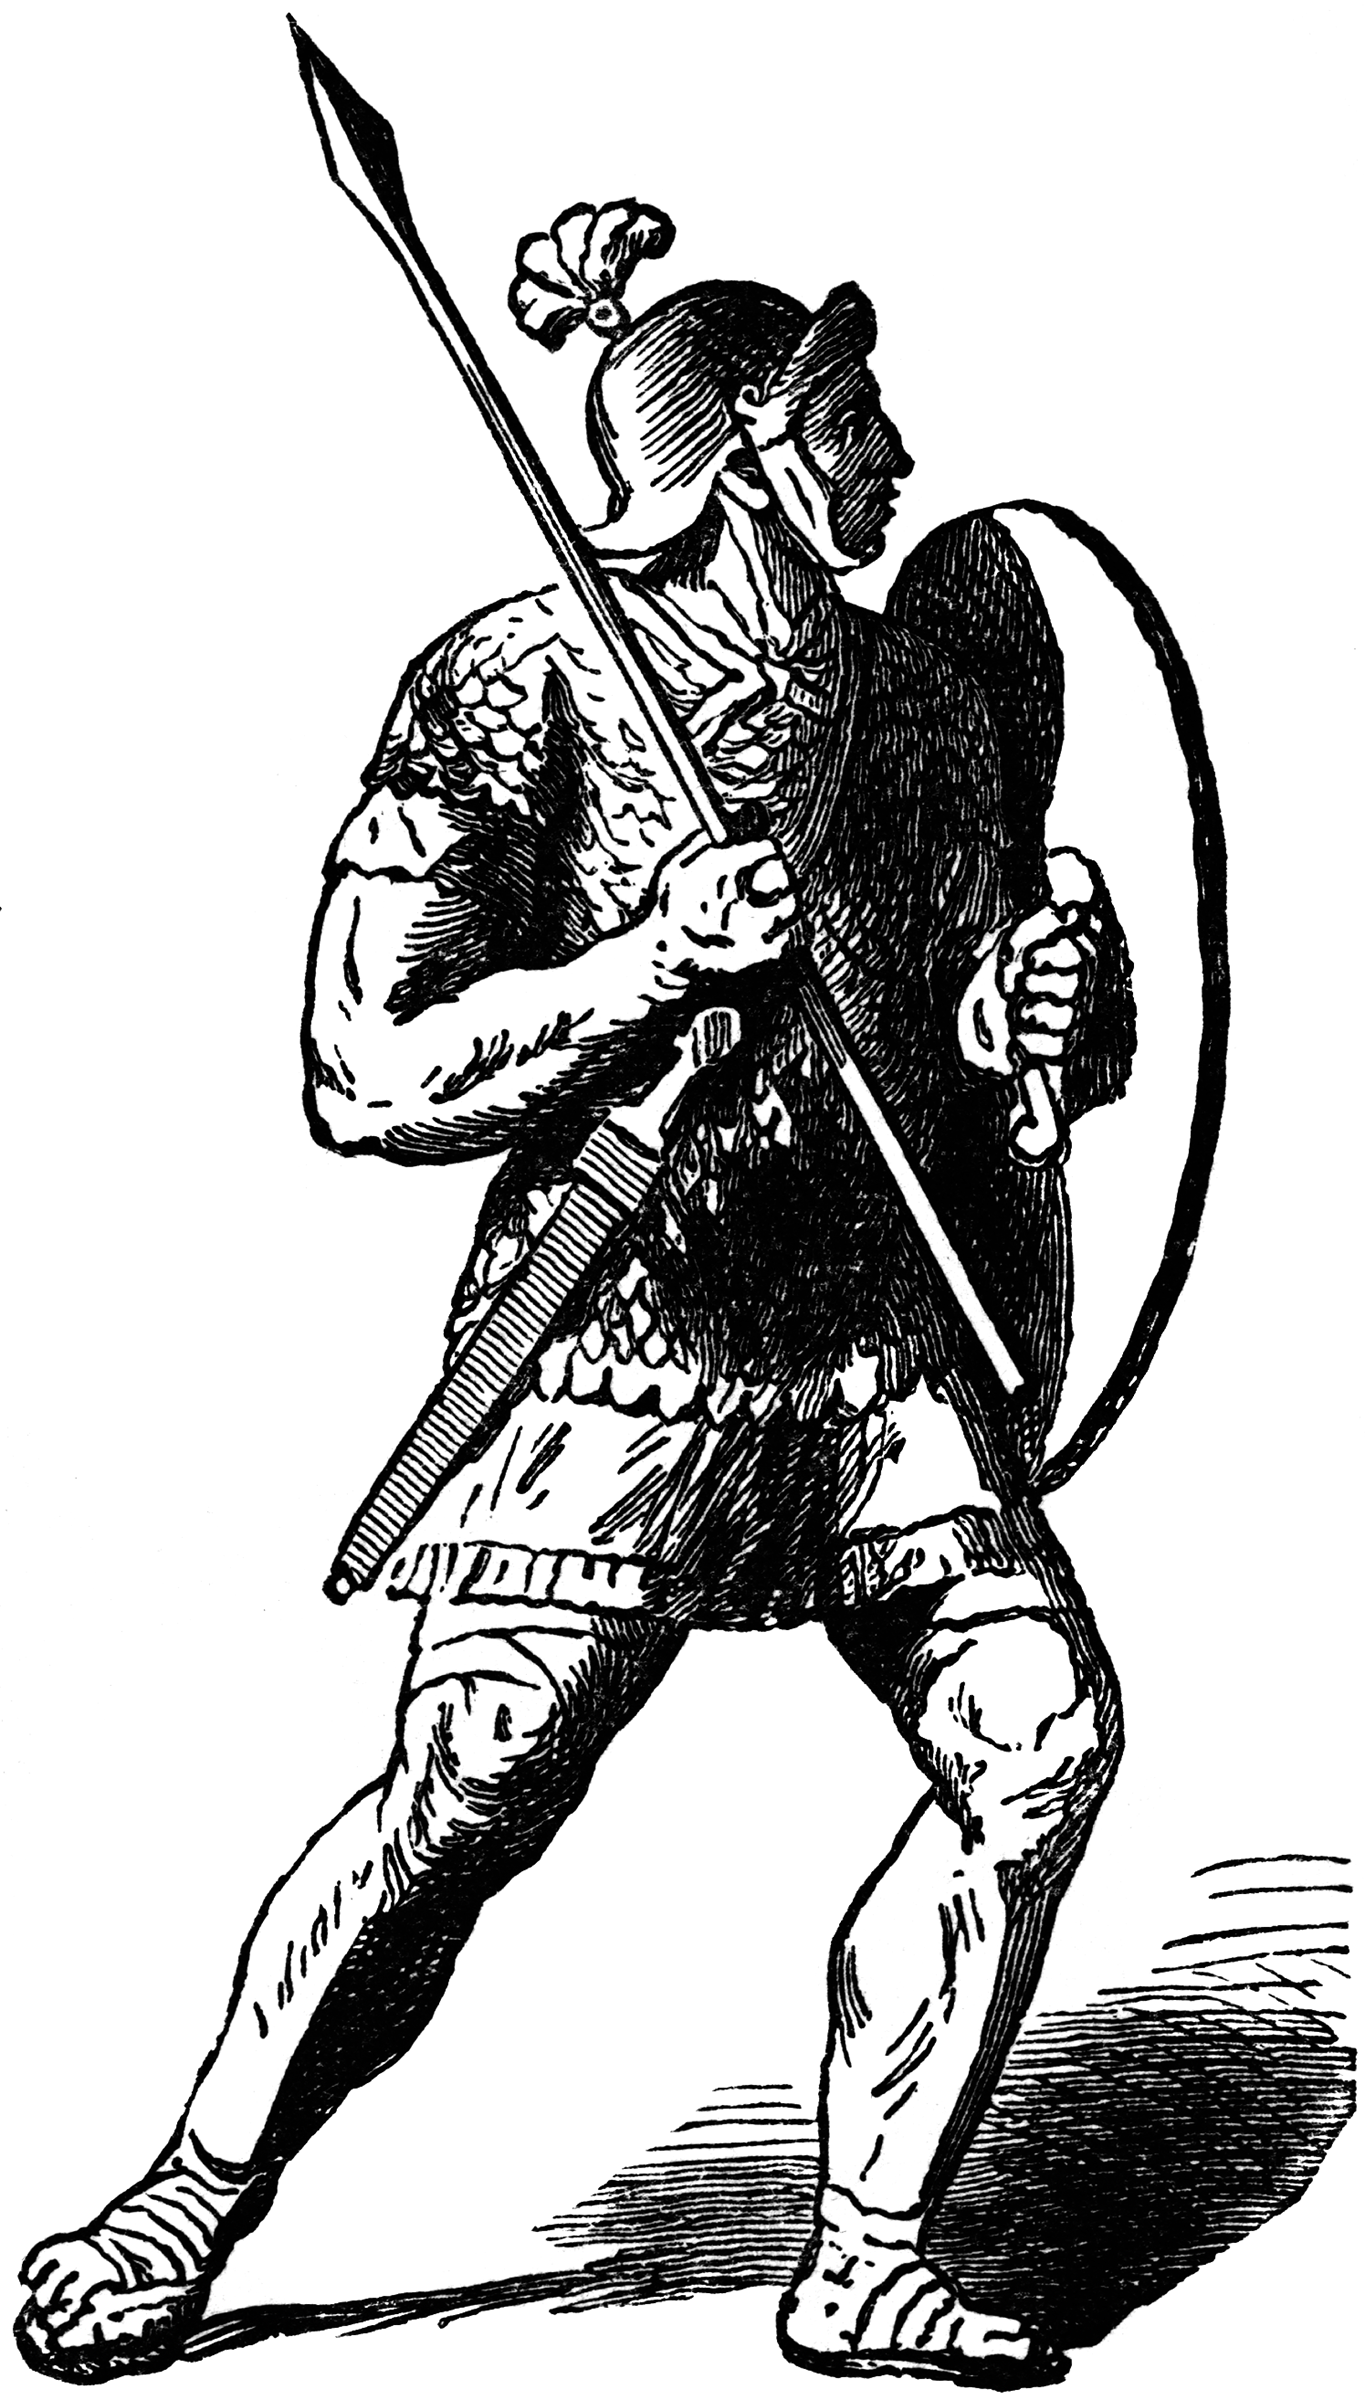 A Roman Soldier, or Legionary, with a Short Javelin and Shield